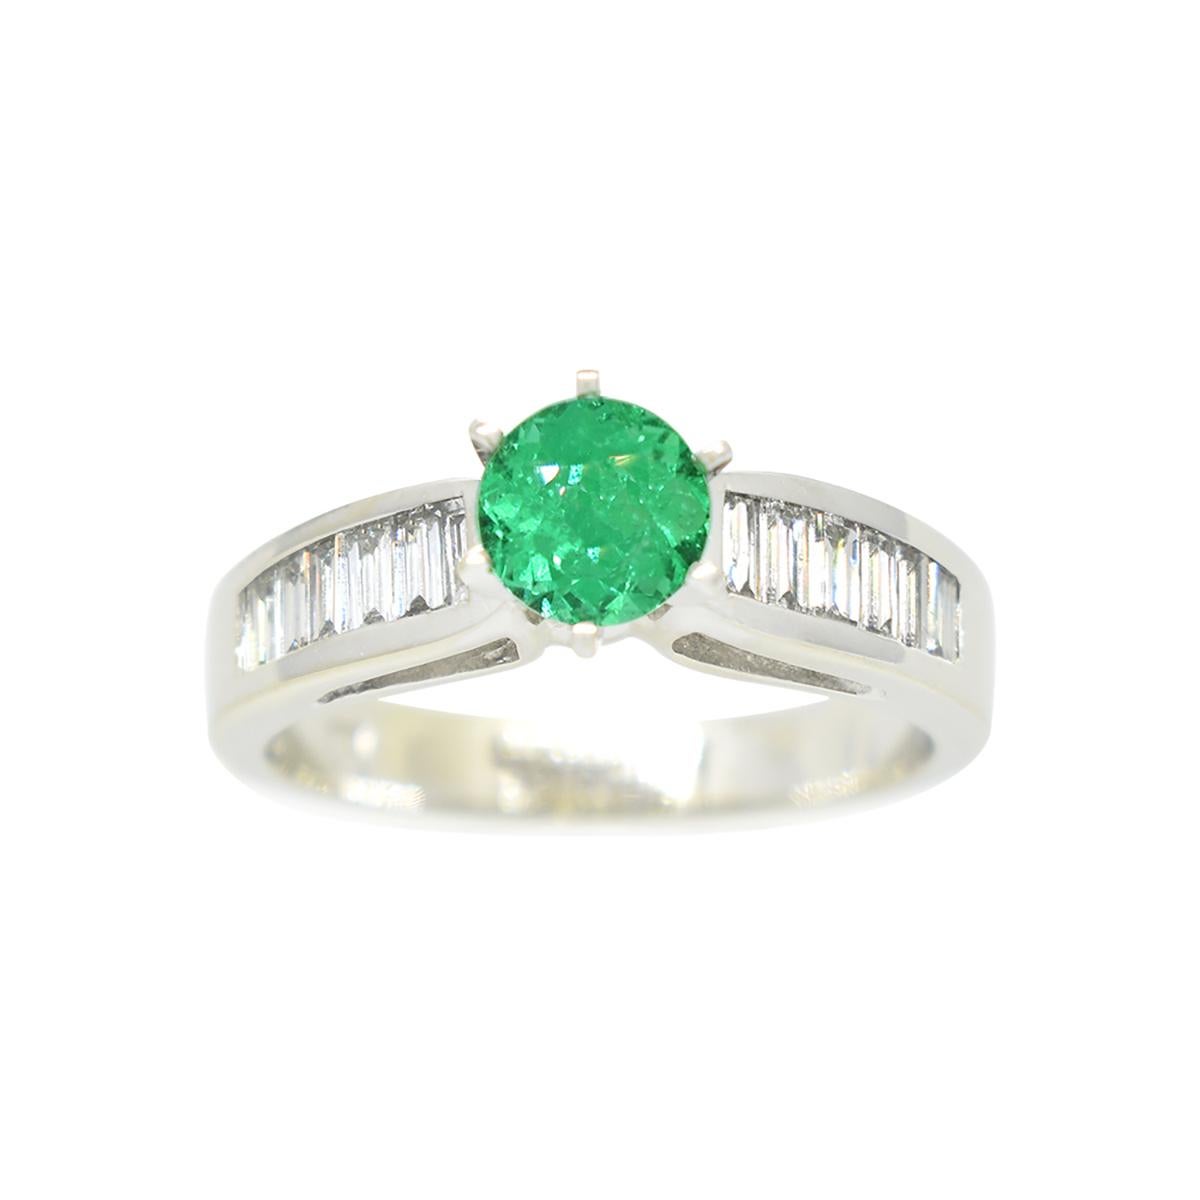 Behold this exquisite Emerald and Diamond Engagement Ring, a true symbol of everlasting love and commitment. Crafted in gleaming 14K white gold, it features a captivating 0.66 Carat round-cut natural Colombian emerald at its heart, surrounded by the